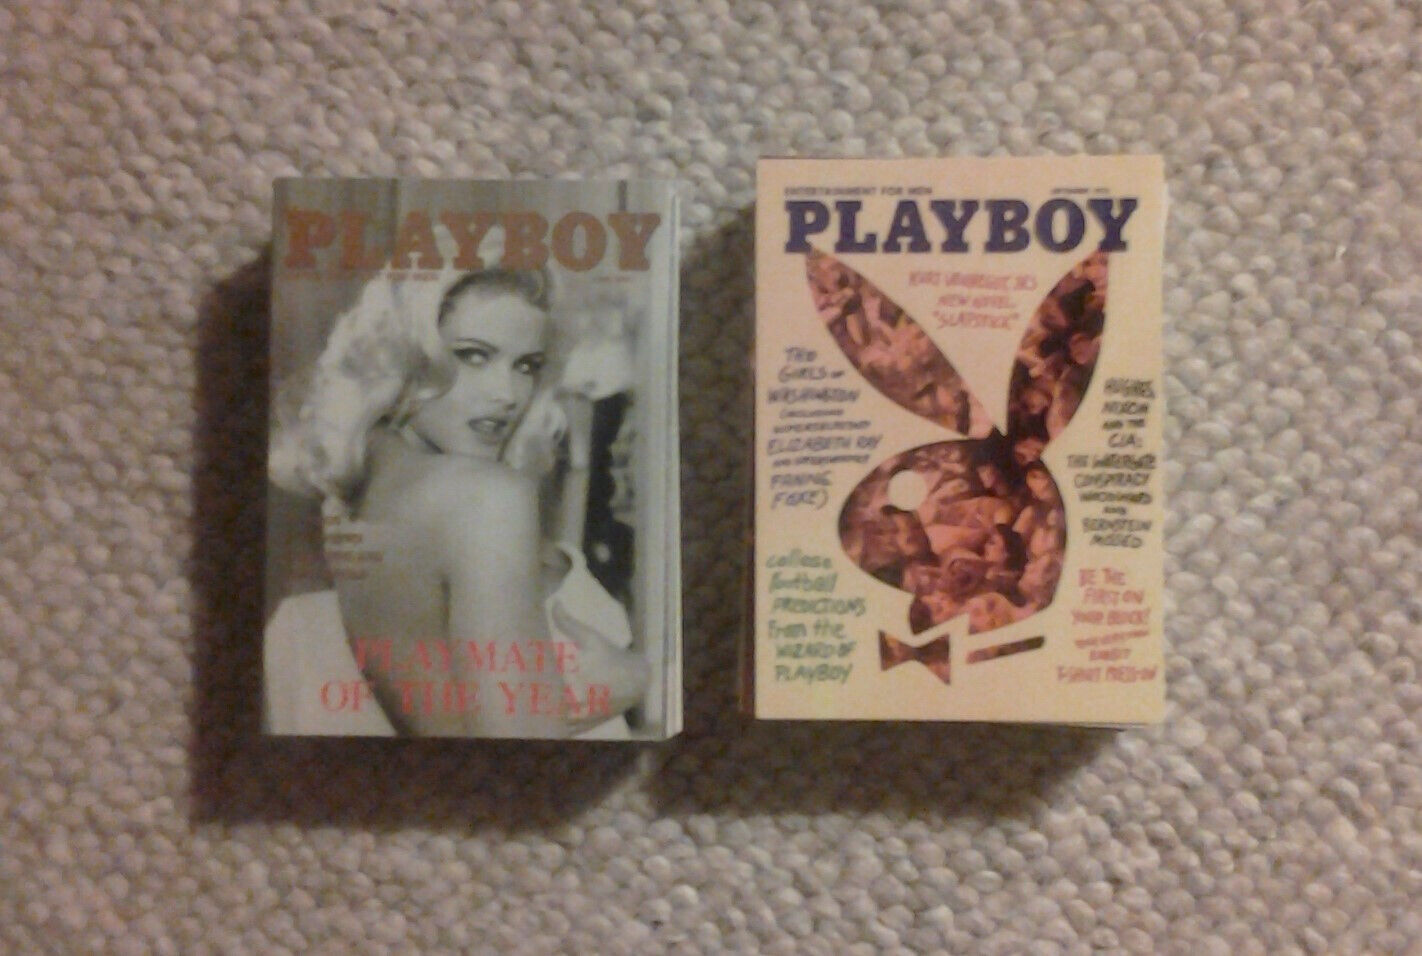 PLAYBOY CENTERFOLD COLLECTOR CARDS SEPTEMBER EDITION SINGLES 2 FOR A BUCK NEW #S